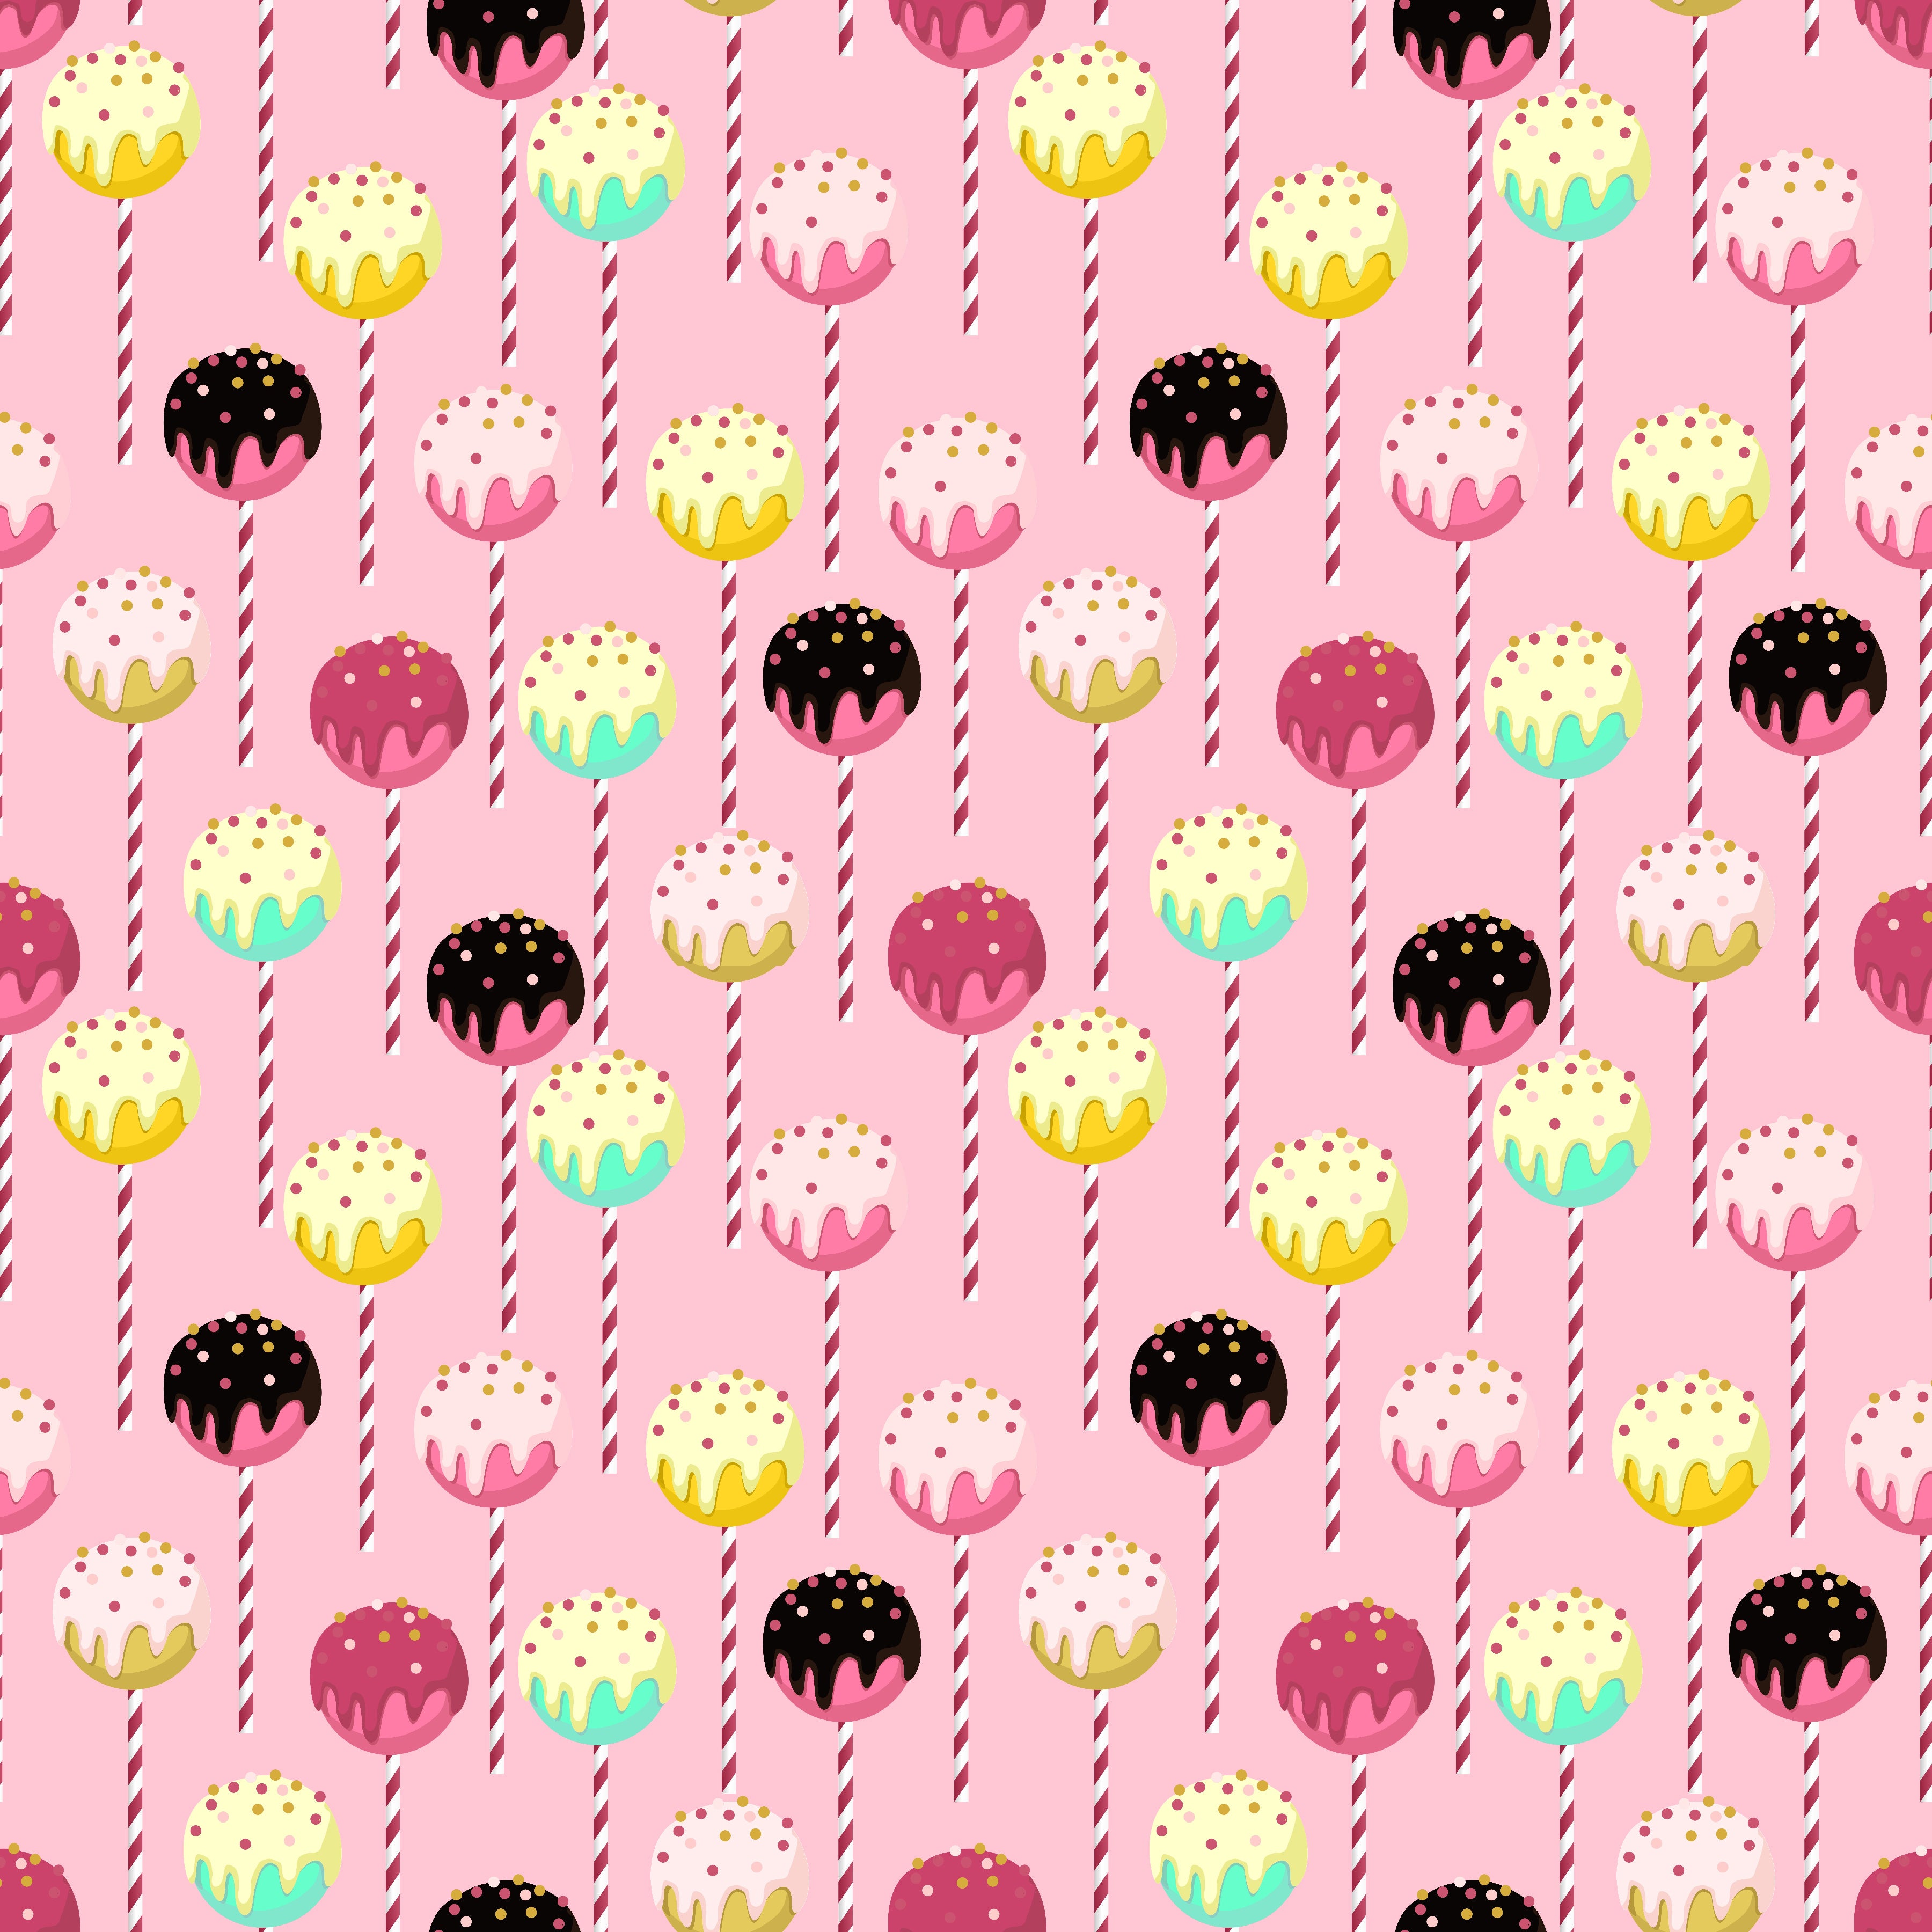 Lollipop Candy Patterned Adhesive Vinyl 918